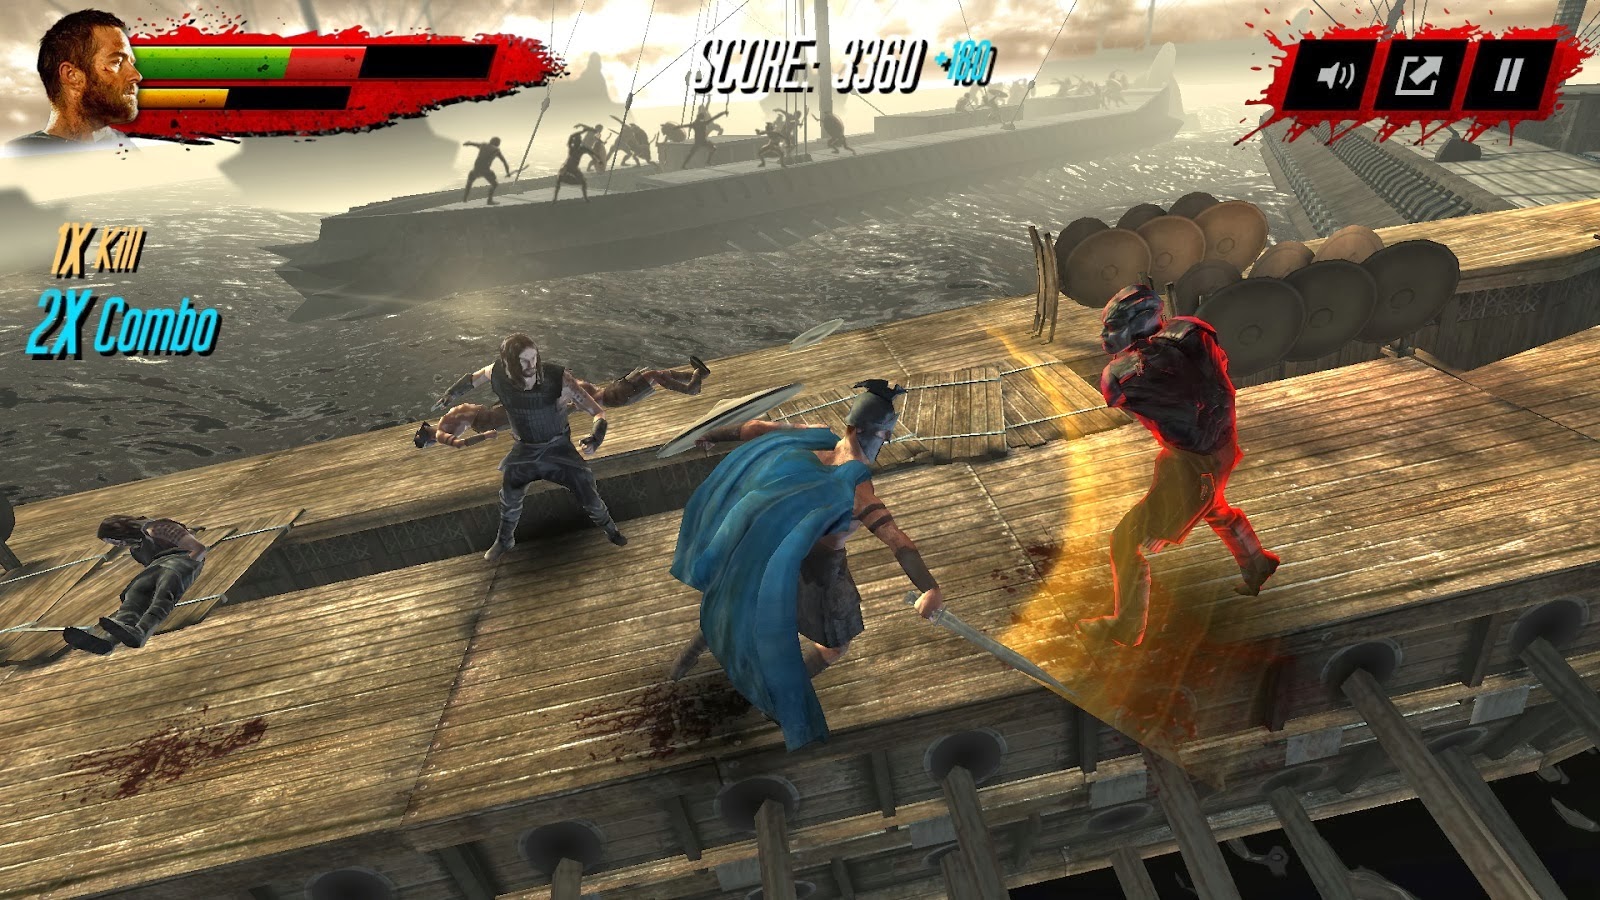 300 Seize Your Glory (Rise of an Empire) APK « Smart Phone